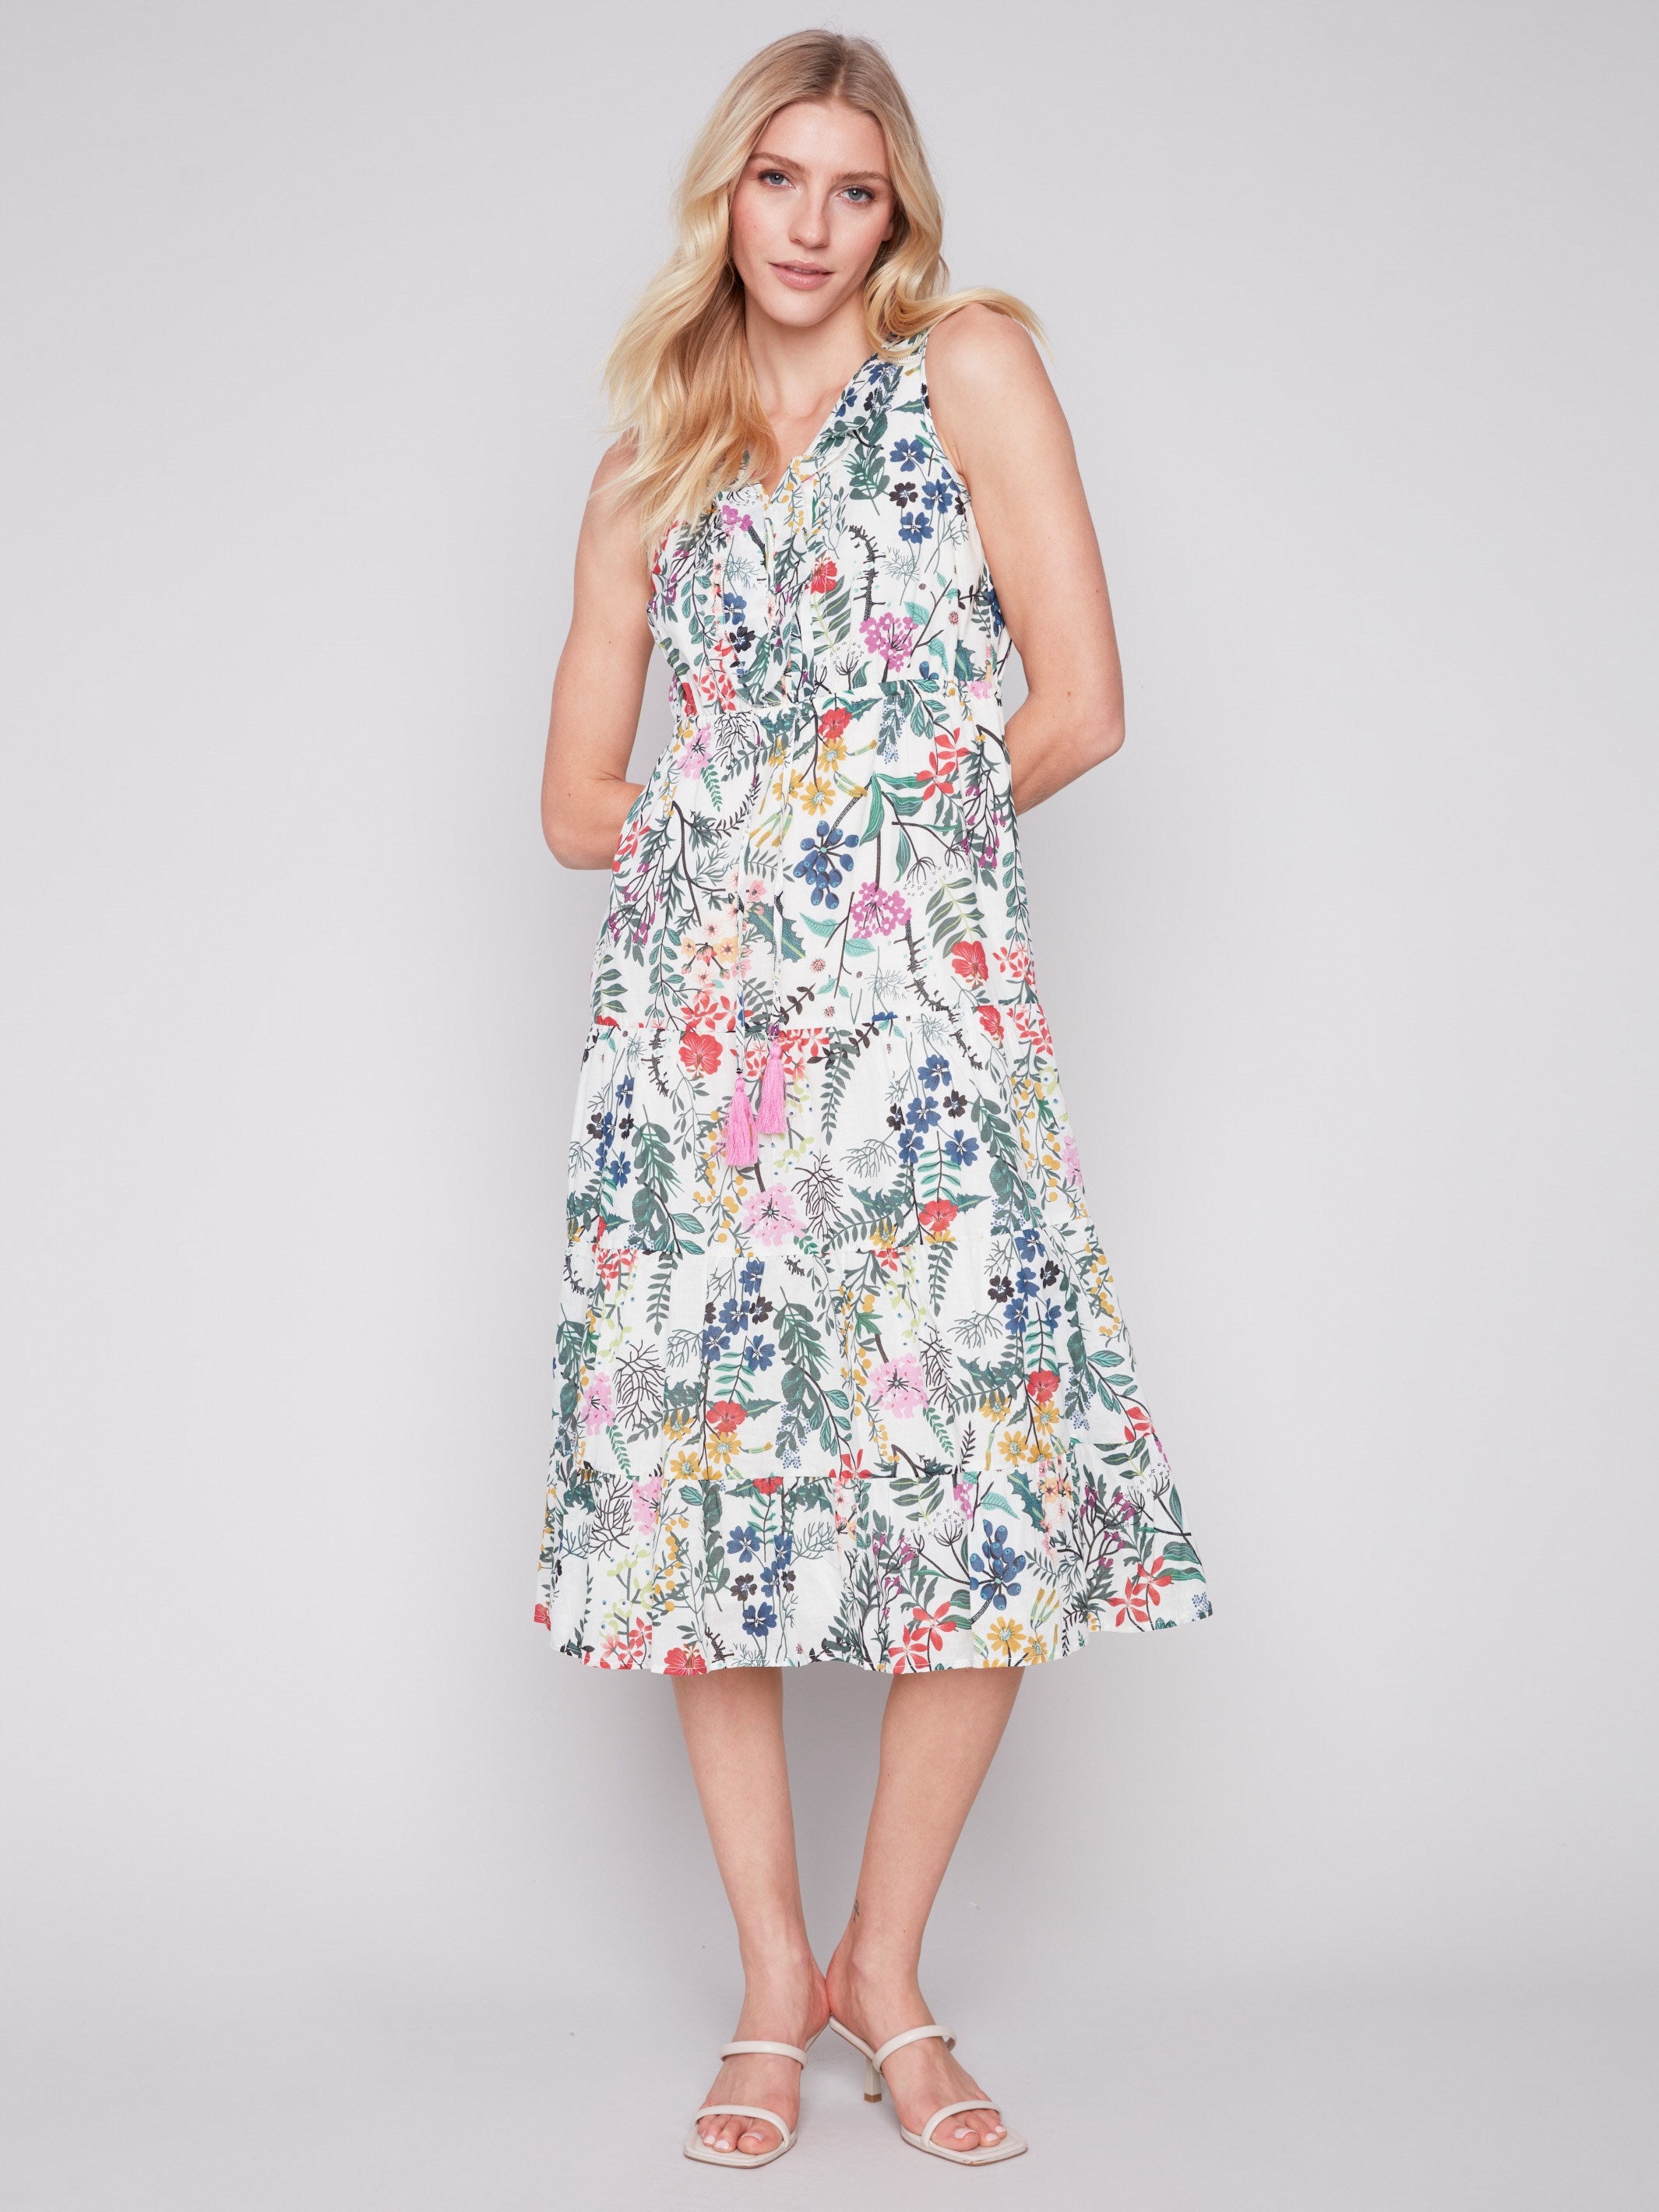 Long Sleeveless Cotton Ruffle Dress - Floral - Charlie B Collection Canada - Image 4